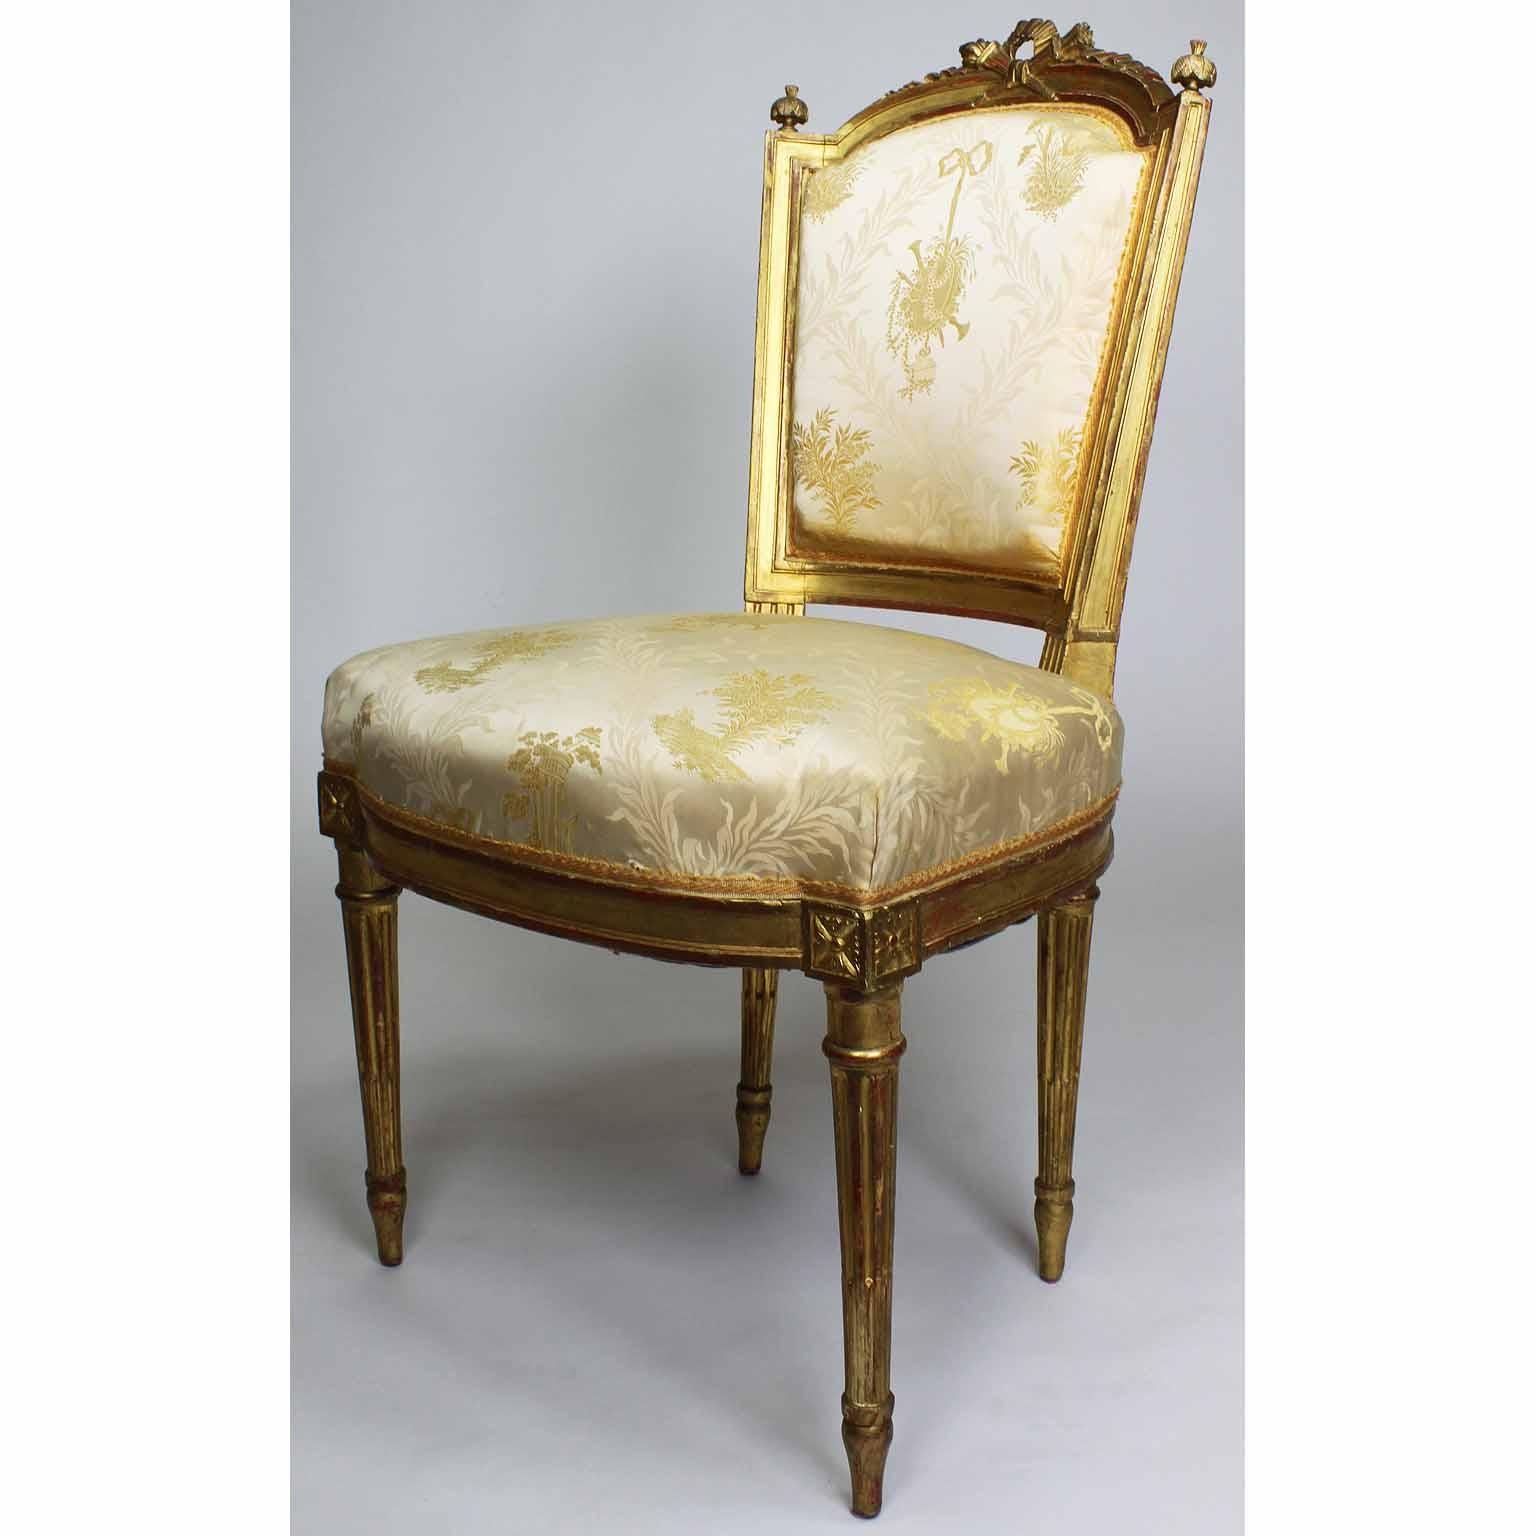 Pair of French 19th century Louis XVI style giltwood carved Boudoir side chairs. The low giltwood carved frames with a padded tapered backrest crowned with carved crossed flaming torches and ribbon, flanked by a pair of corner finials, raised four